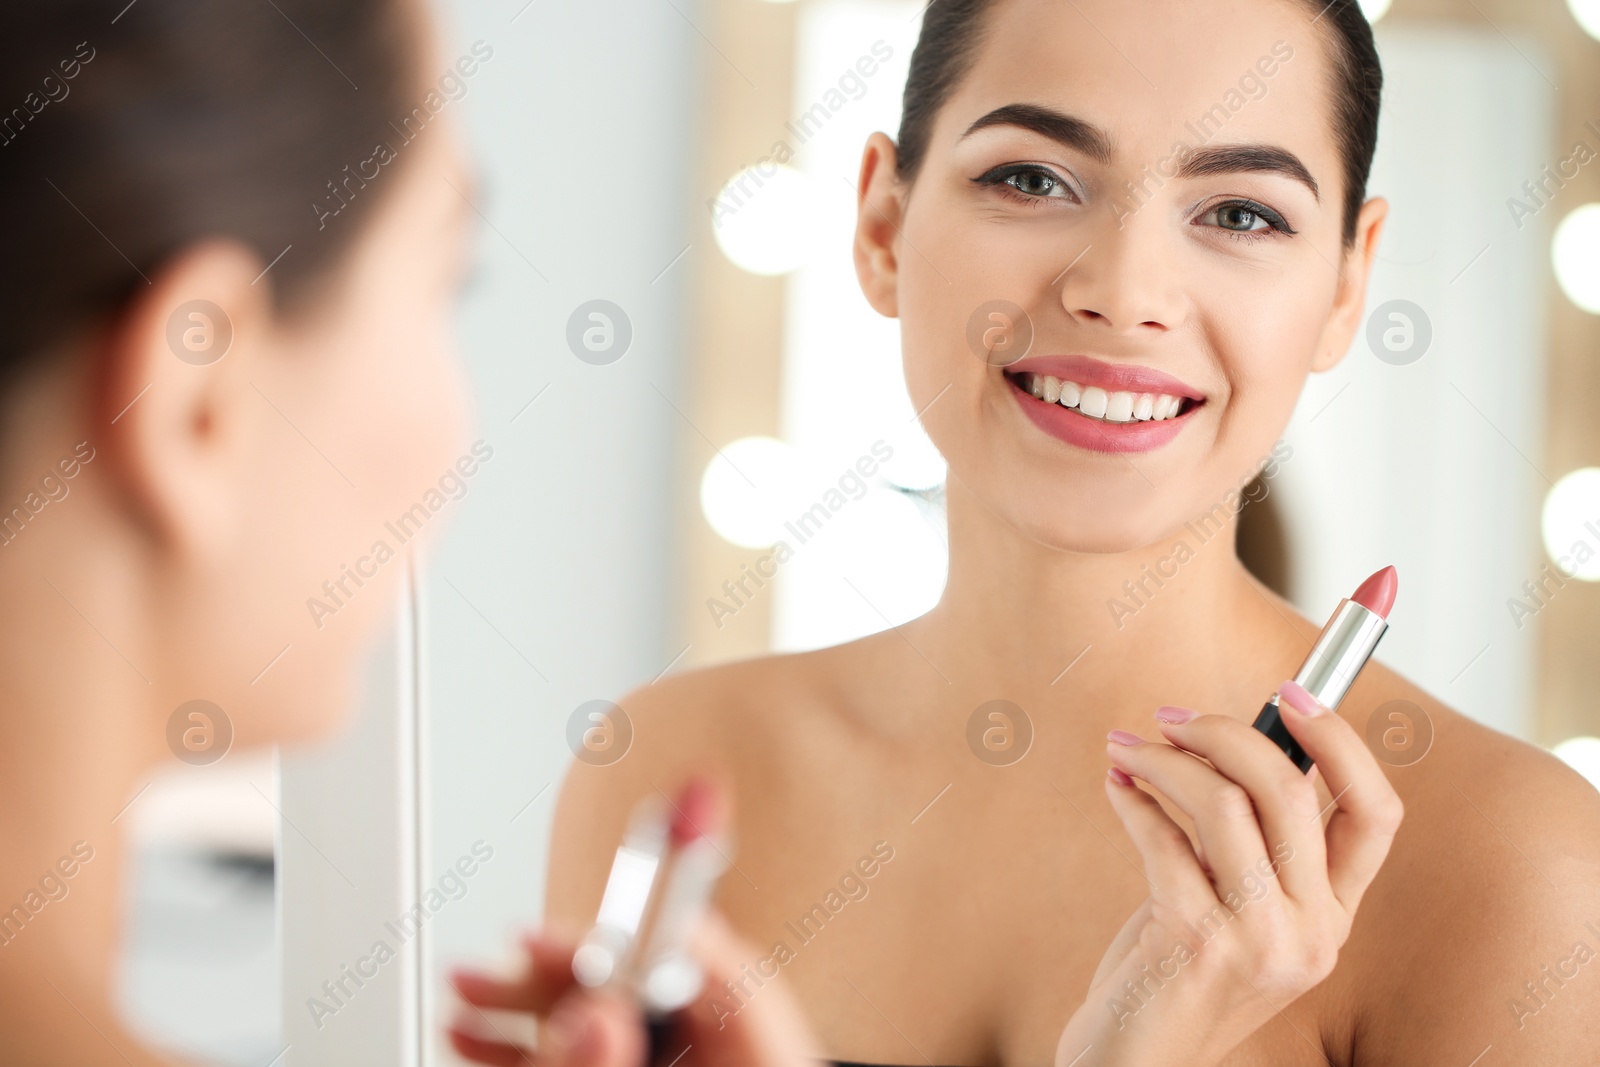 Photo of Young woman applying lipstick in front of mirror